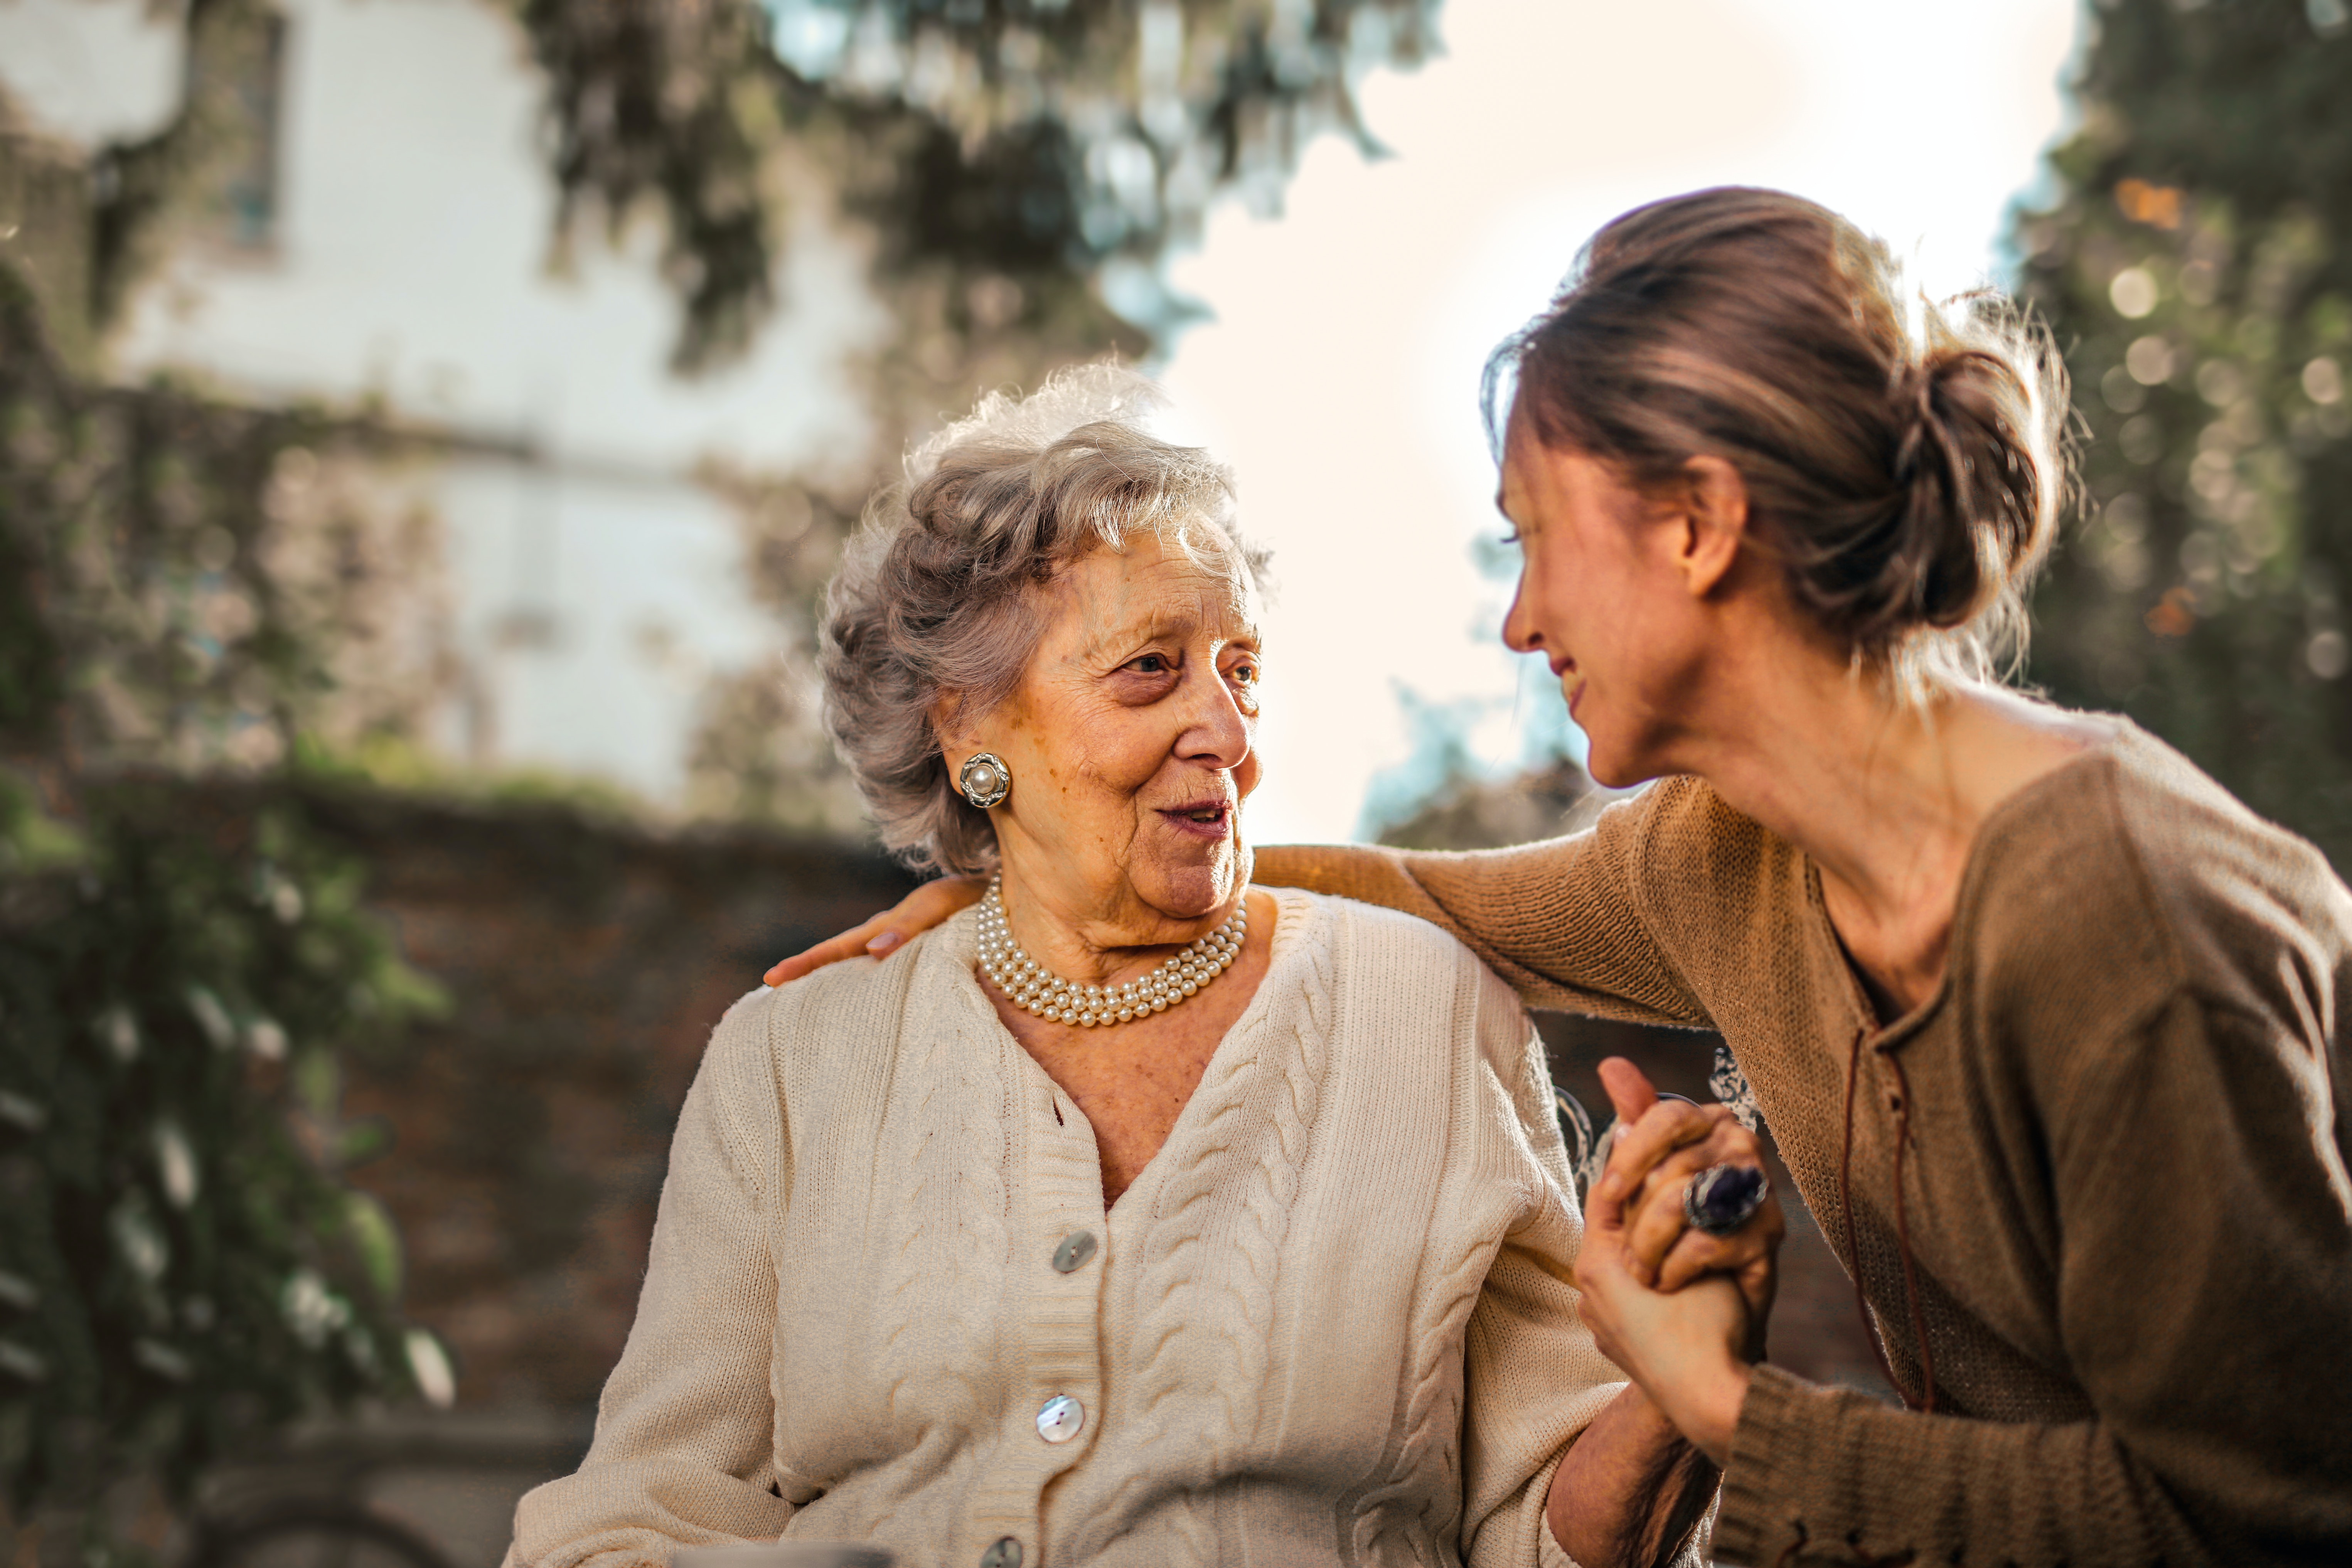 An older woman talks to a younger woman